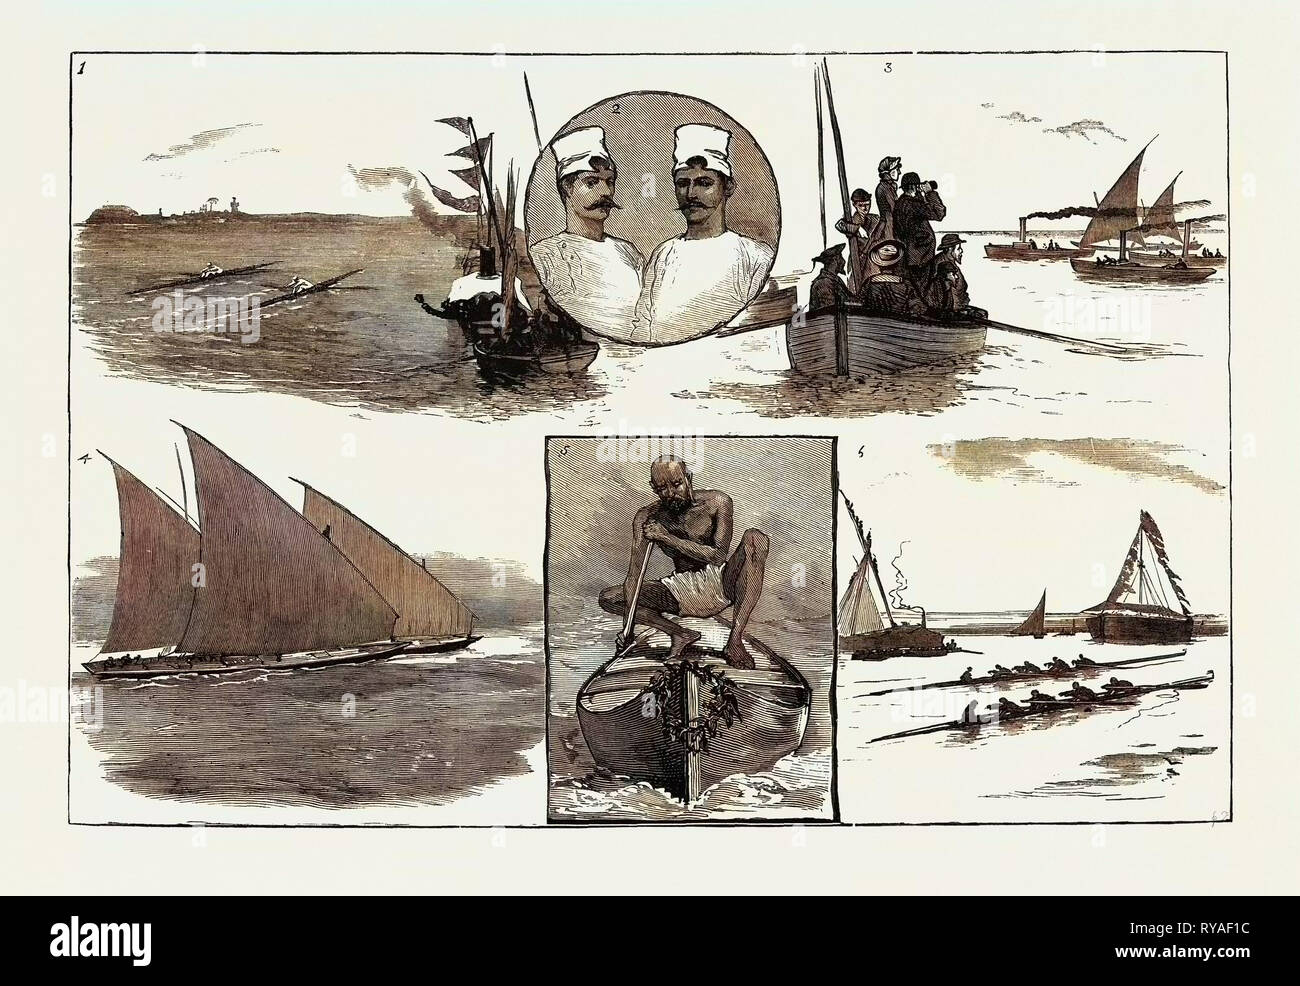 A Regatta at Bombay: 1. The Final Heat for the Champion Sculls, 2. Maharatta Fishermen (Hindoos), 3. Steam-Launch Race, 4. The Competition for the Royal Bombay Yacht Club, 5. The Winner of the Canoe-Race, 6. Bombay Versus Poonah: Four-Oared Race Stock Photo